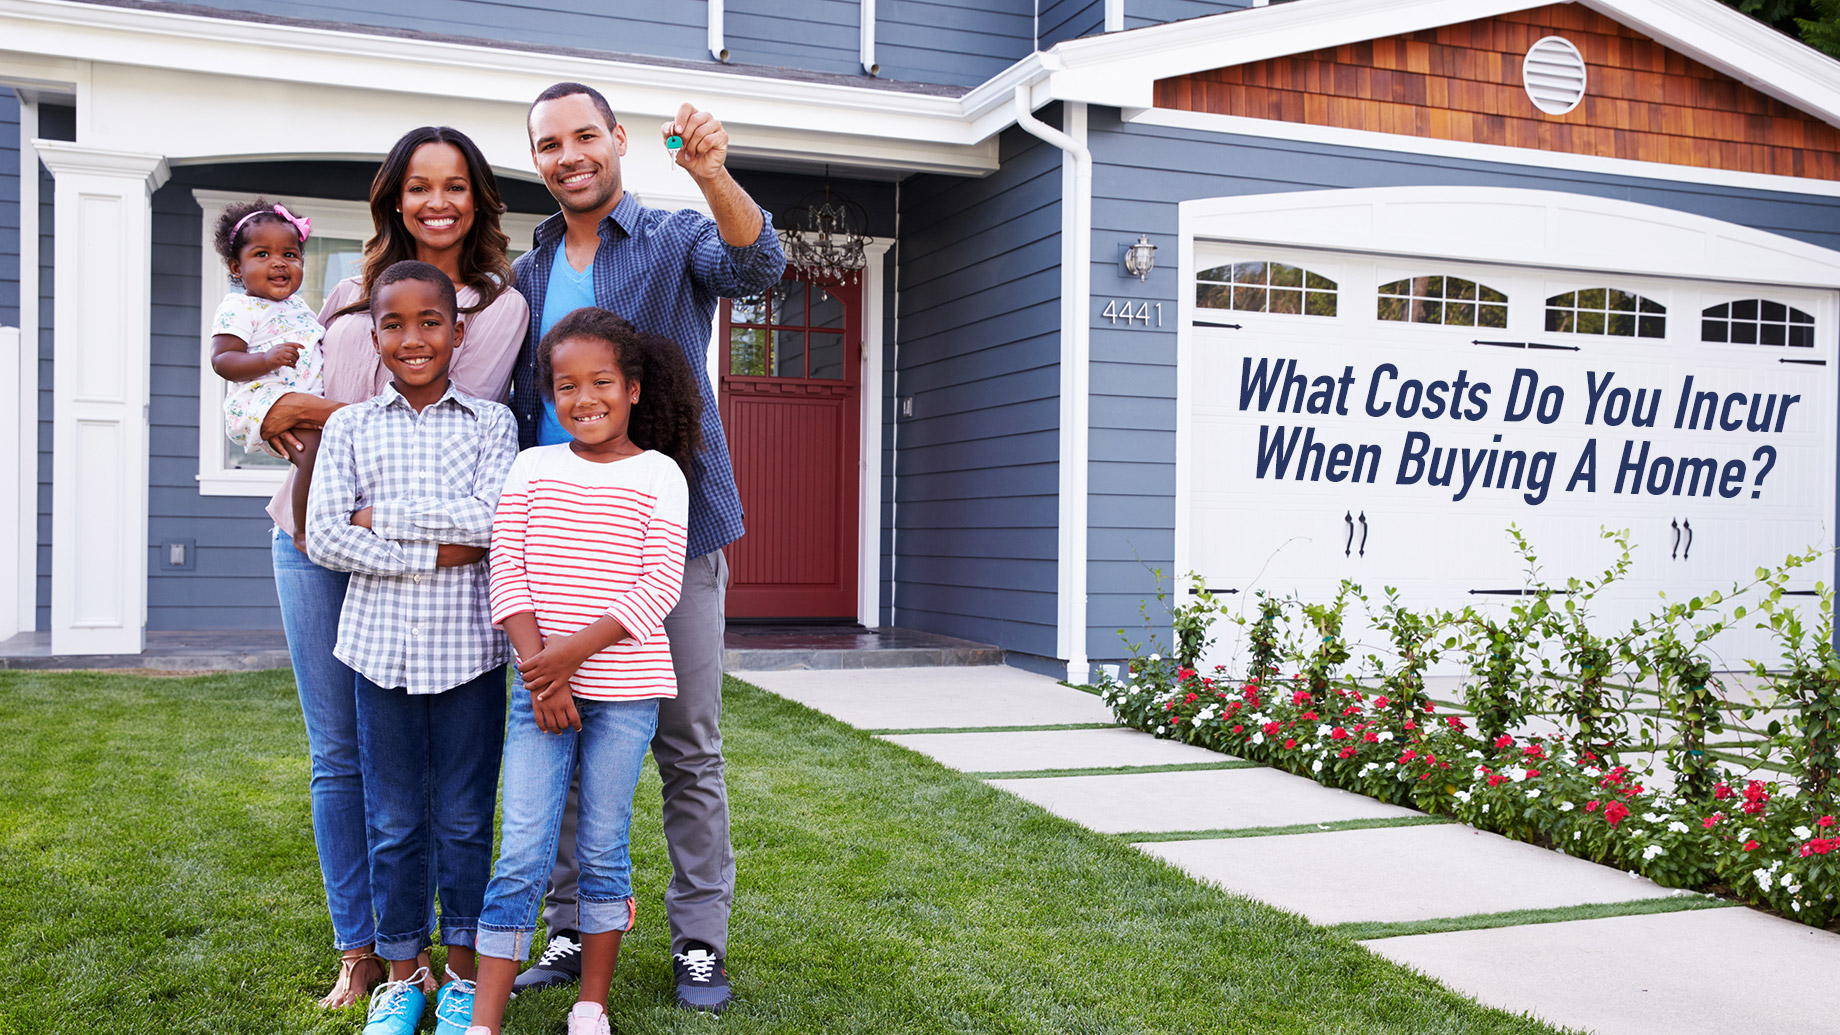 What Costs Do You Incur When Buying A Home?